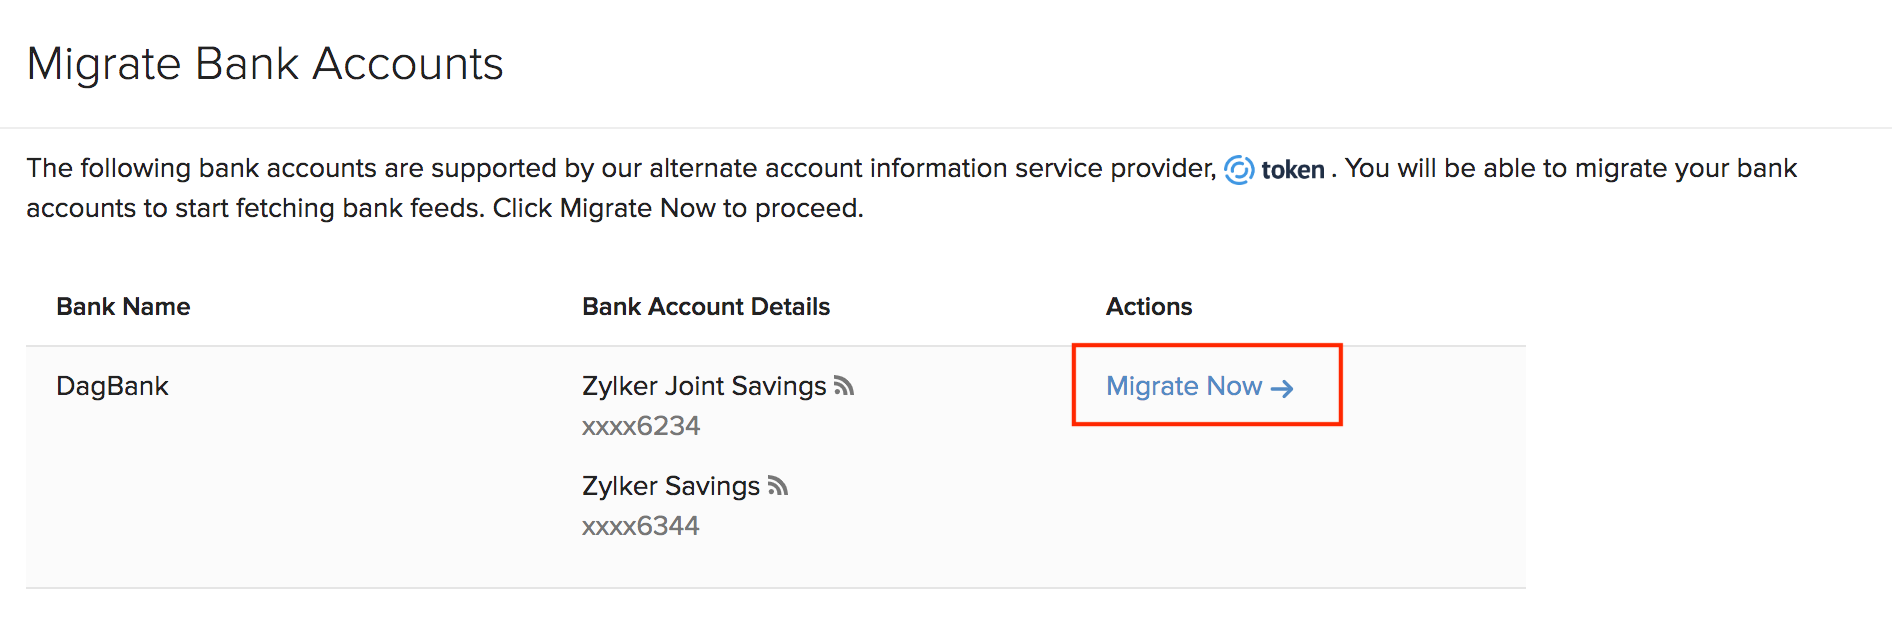 Migrate Now